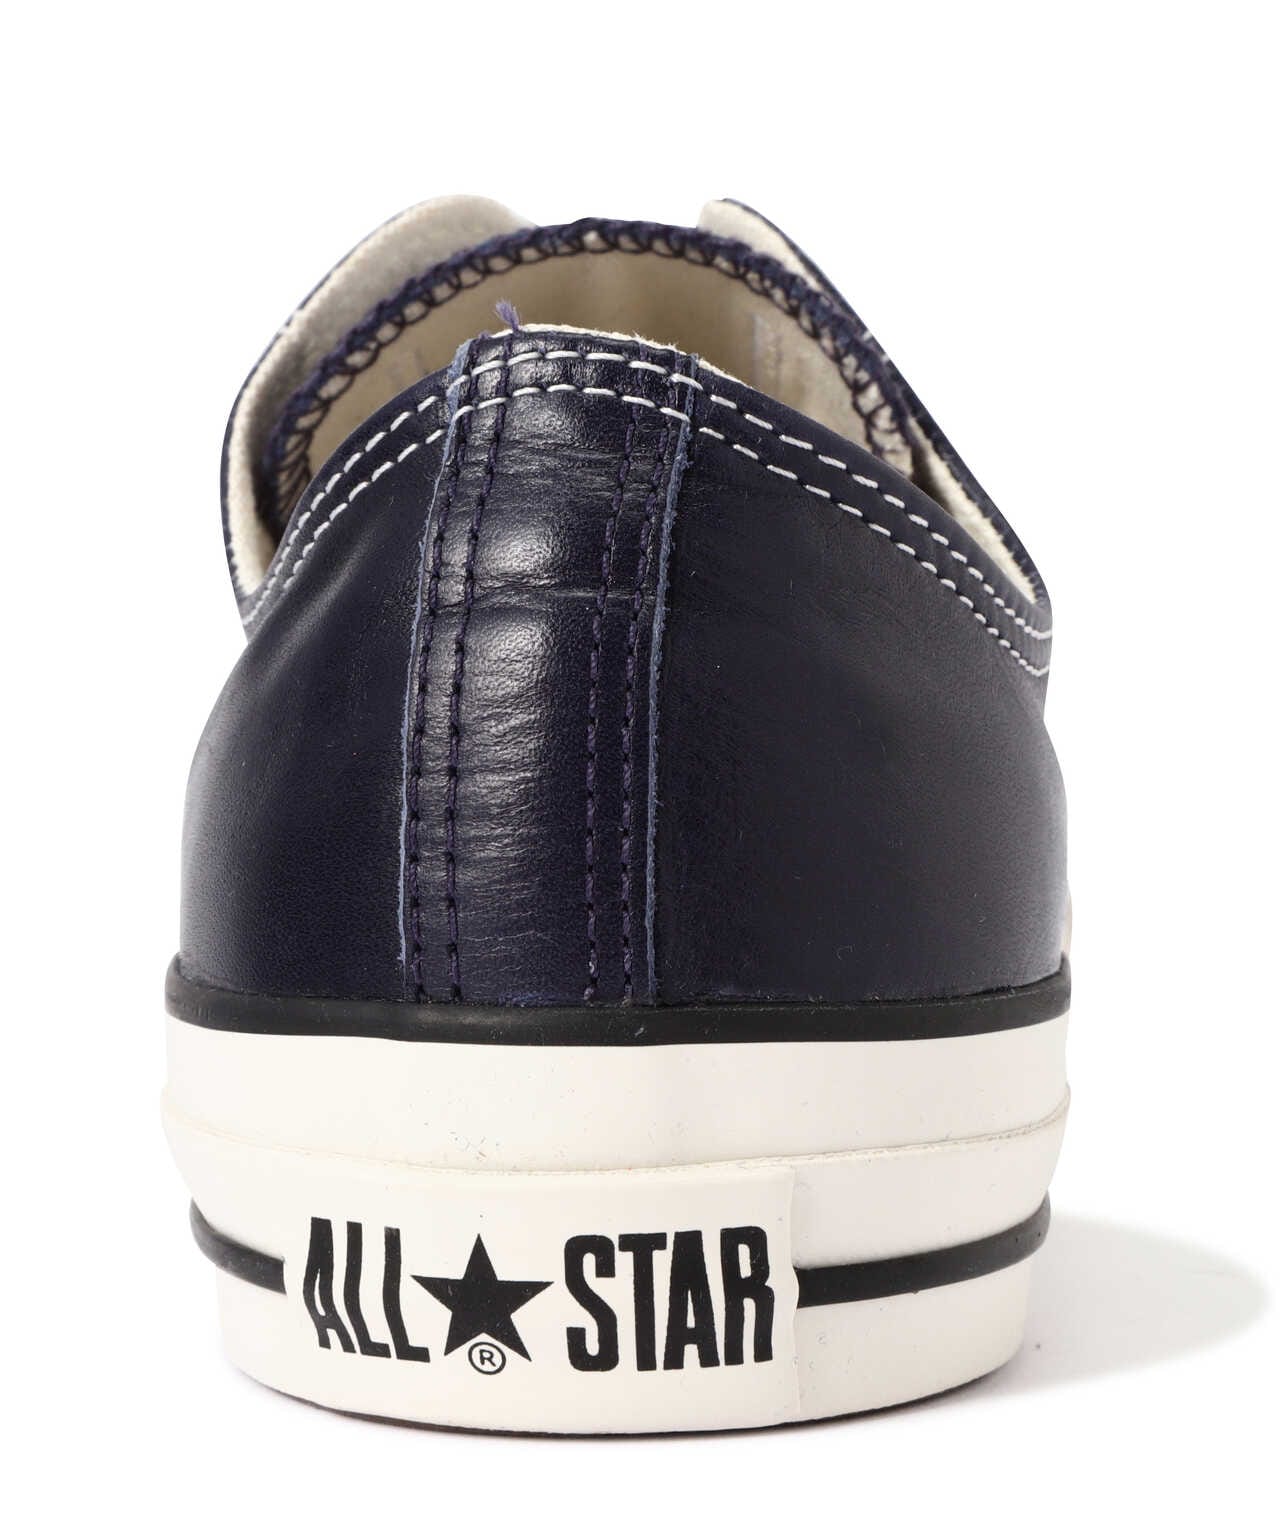 CONVERSE/コンバース/ALL STAR OLIVE GREEN LEATHER OX/オールスター